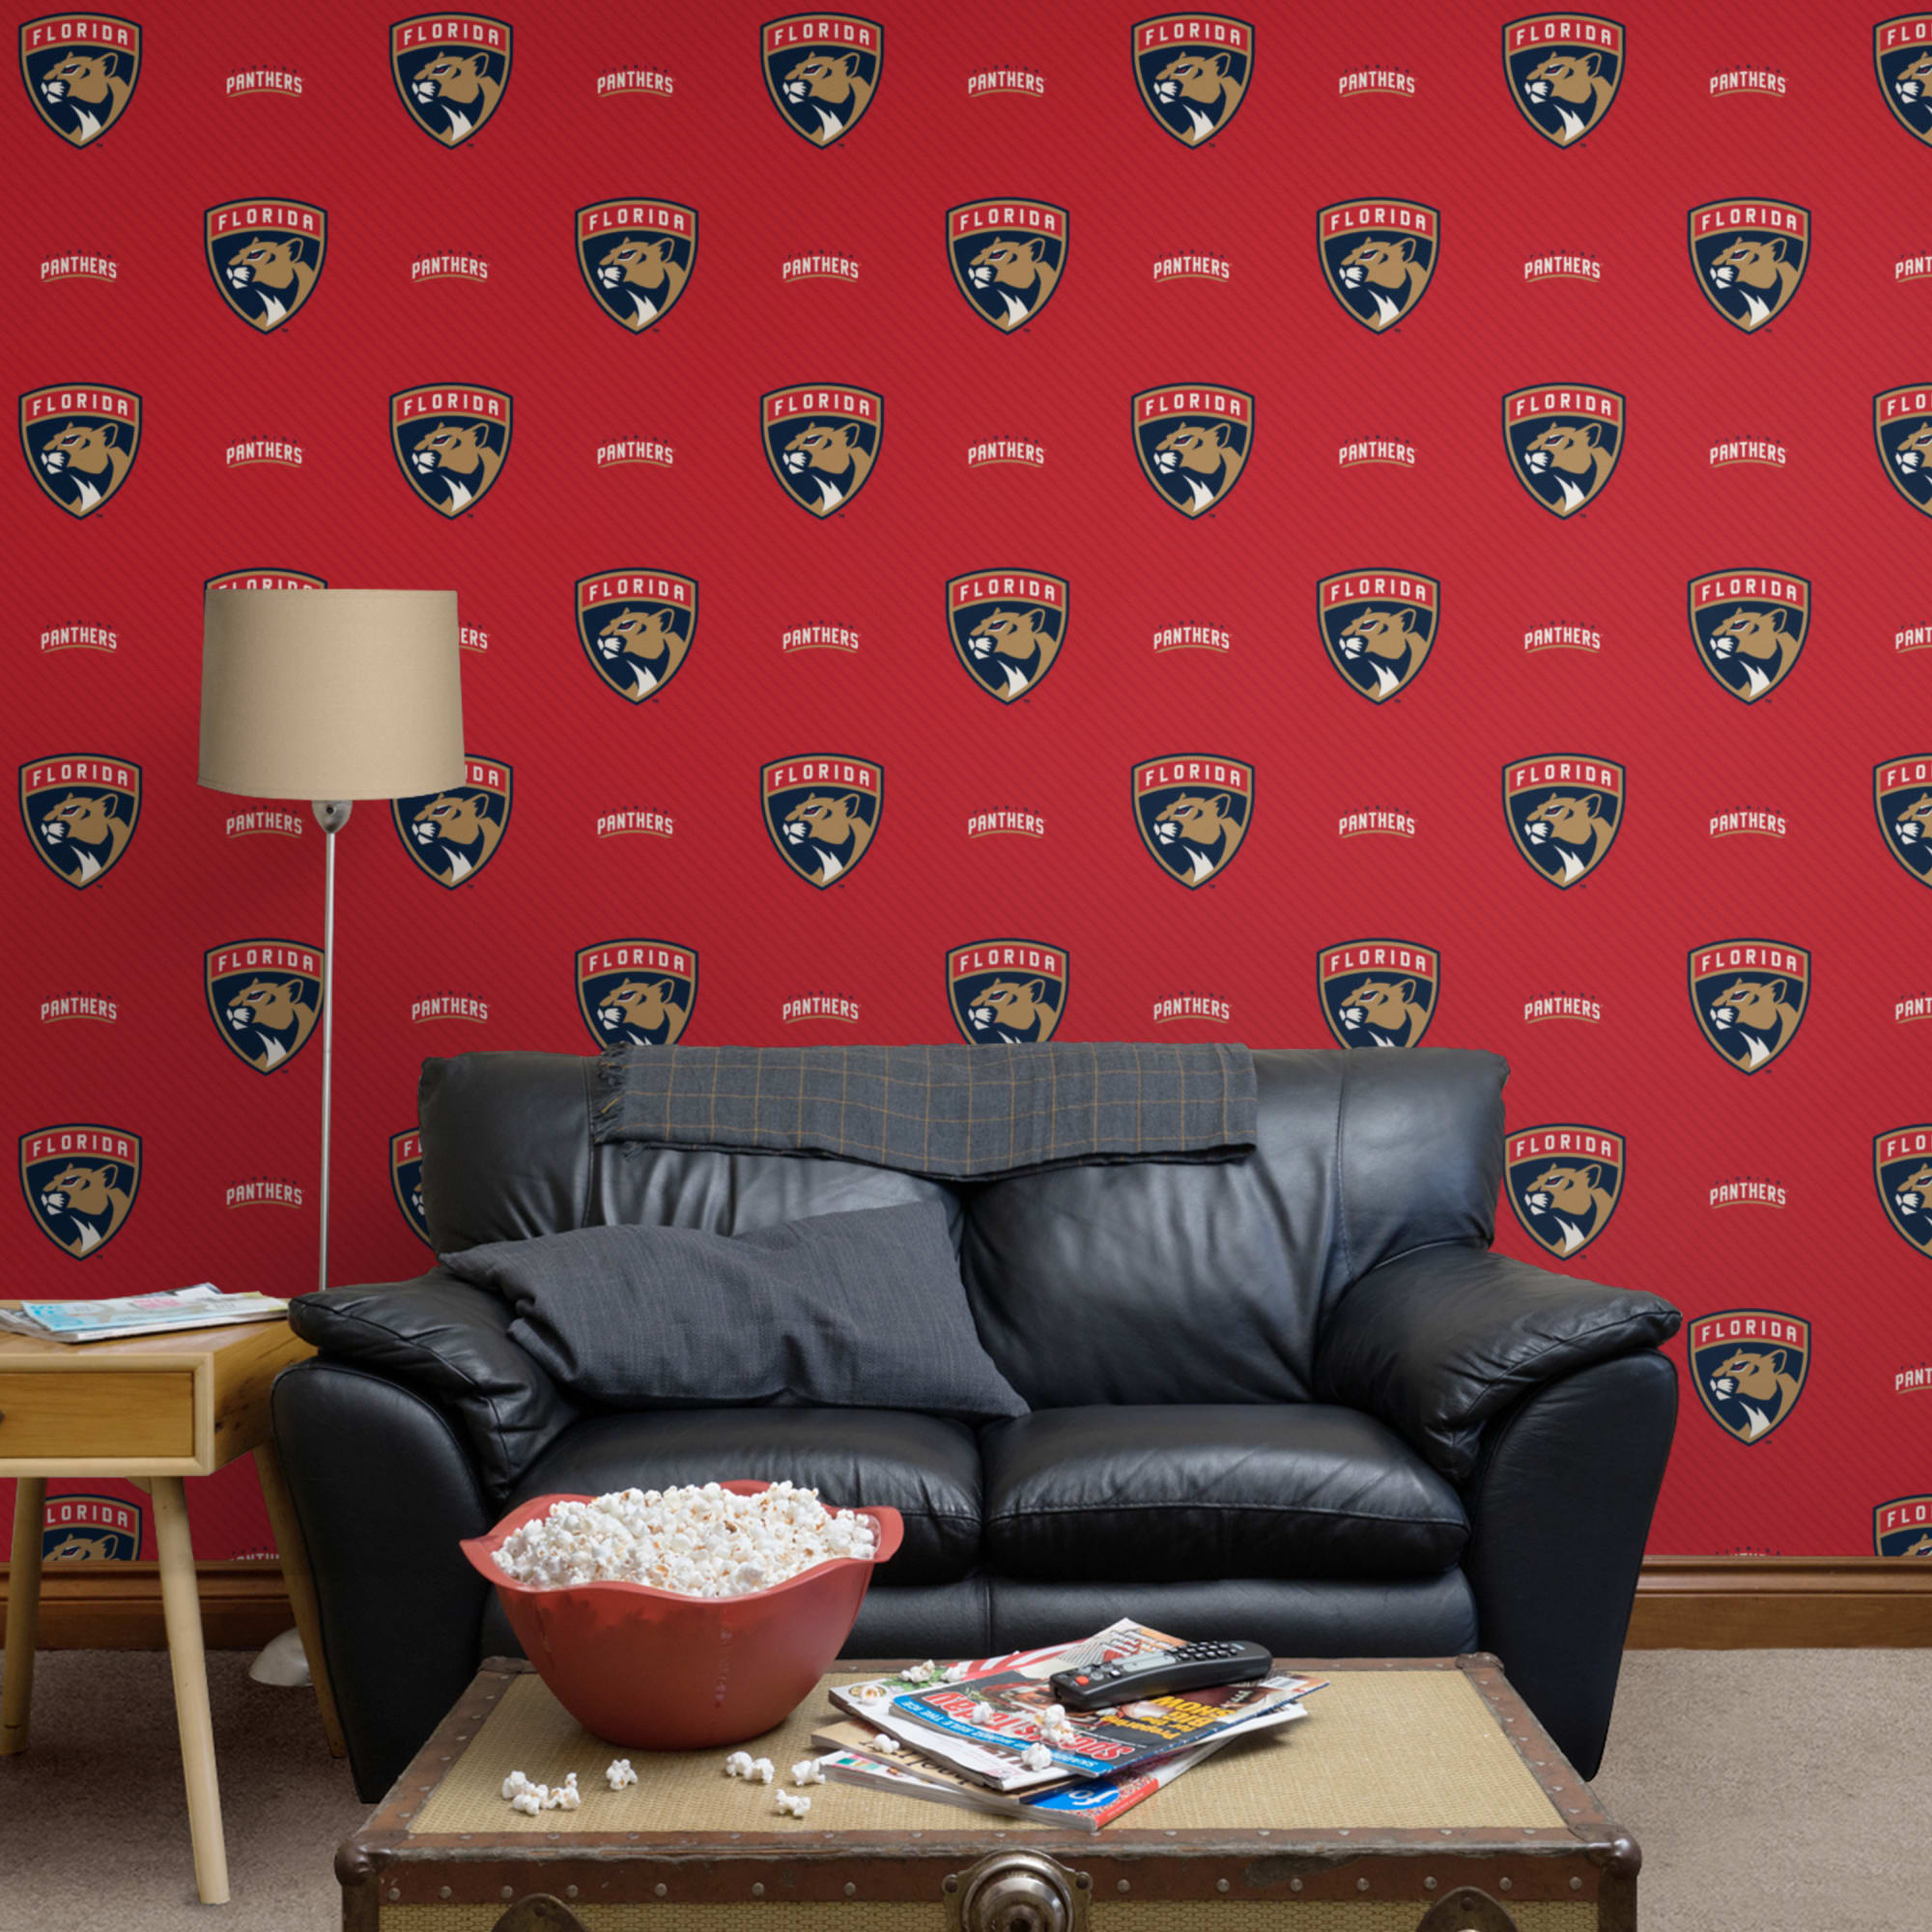 Florida Panthers: Stripes Pattern - Officially Licensed NHL Removable Wallpaper 12" x 12" Sample by Fathead